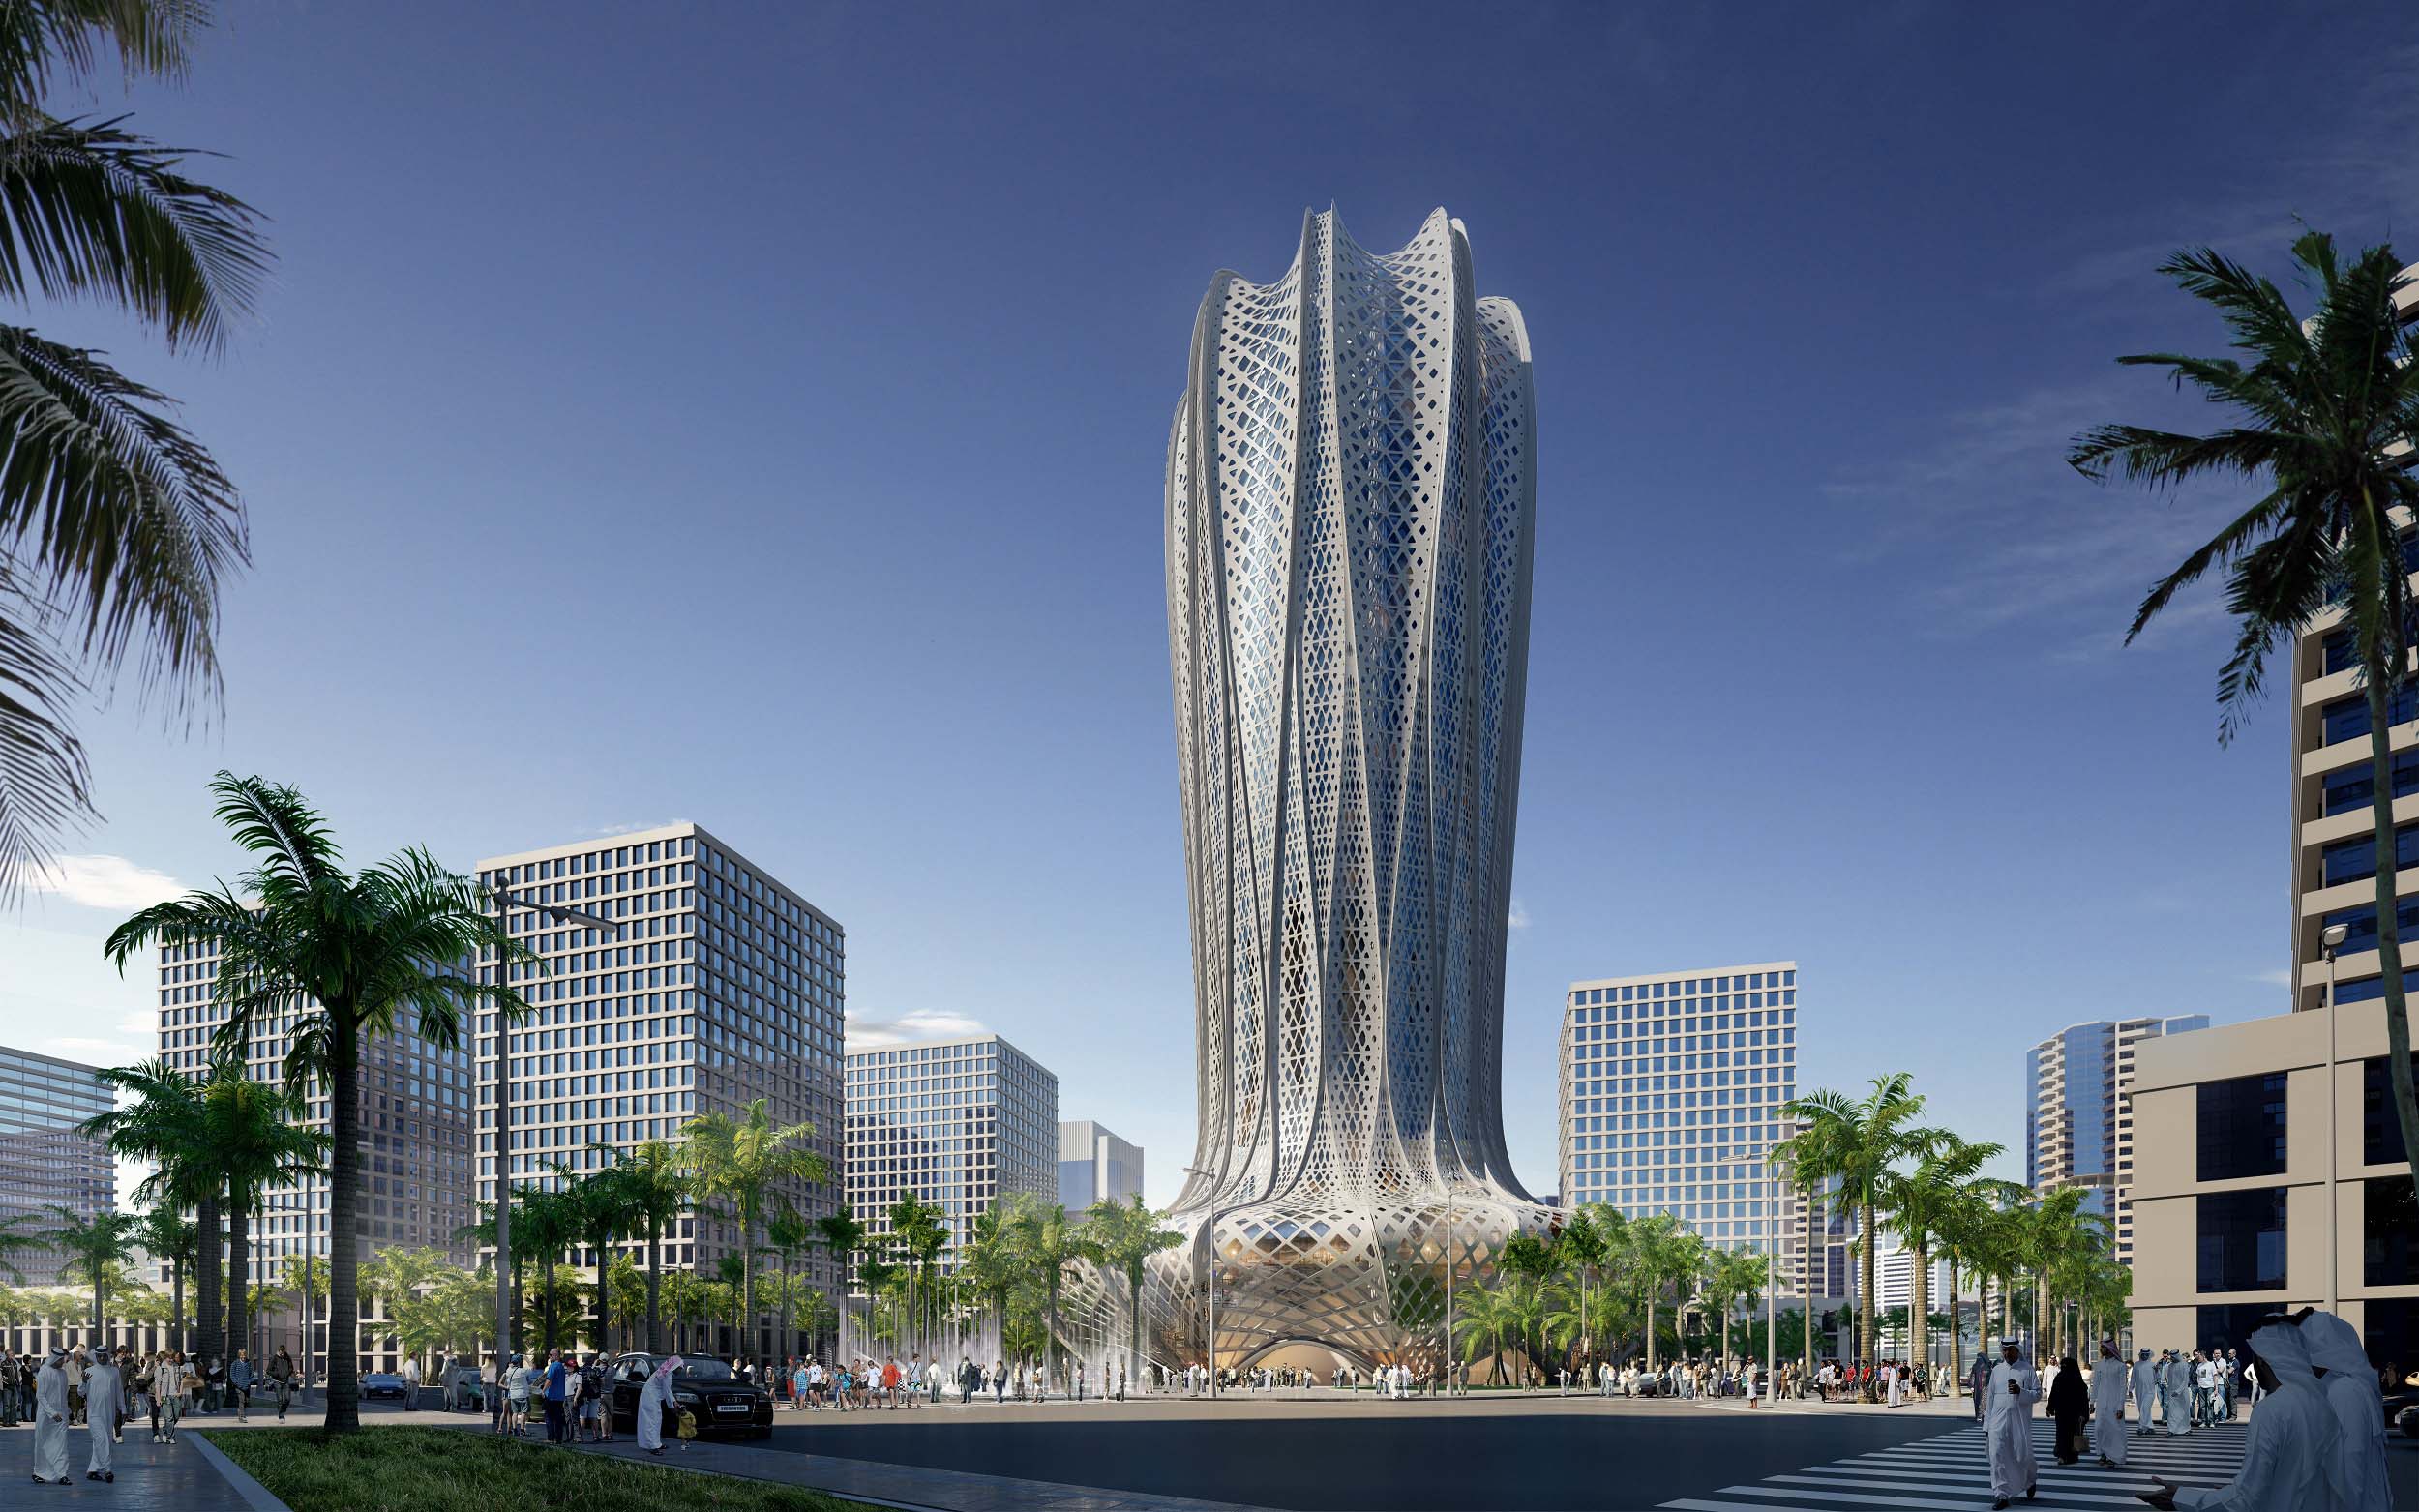 Zaha Hadid's design for the tower in Lusail 